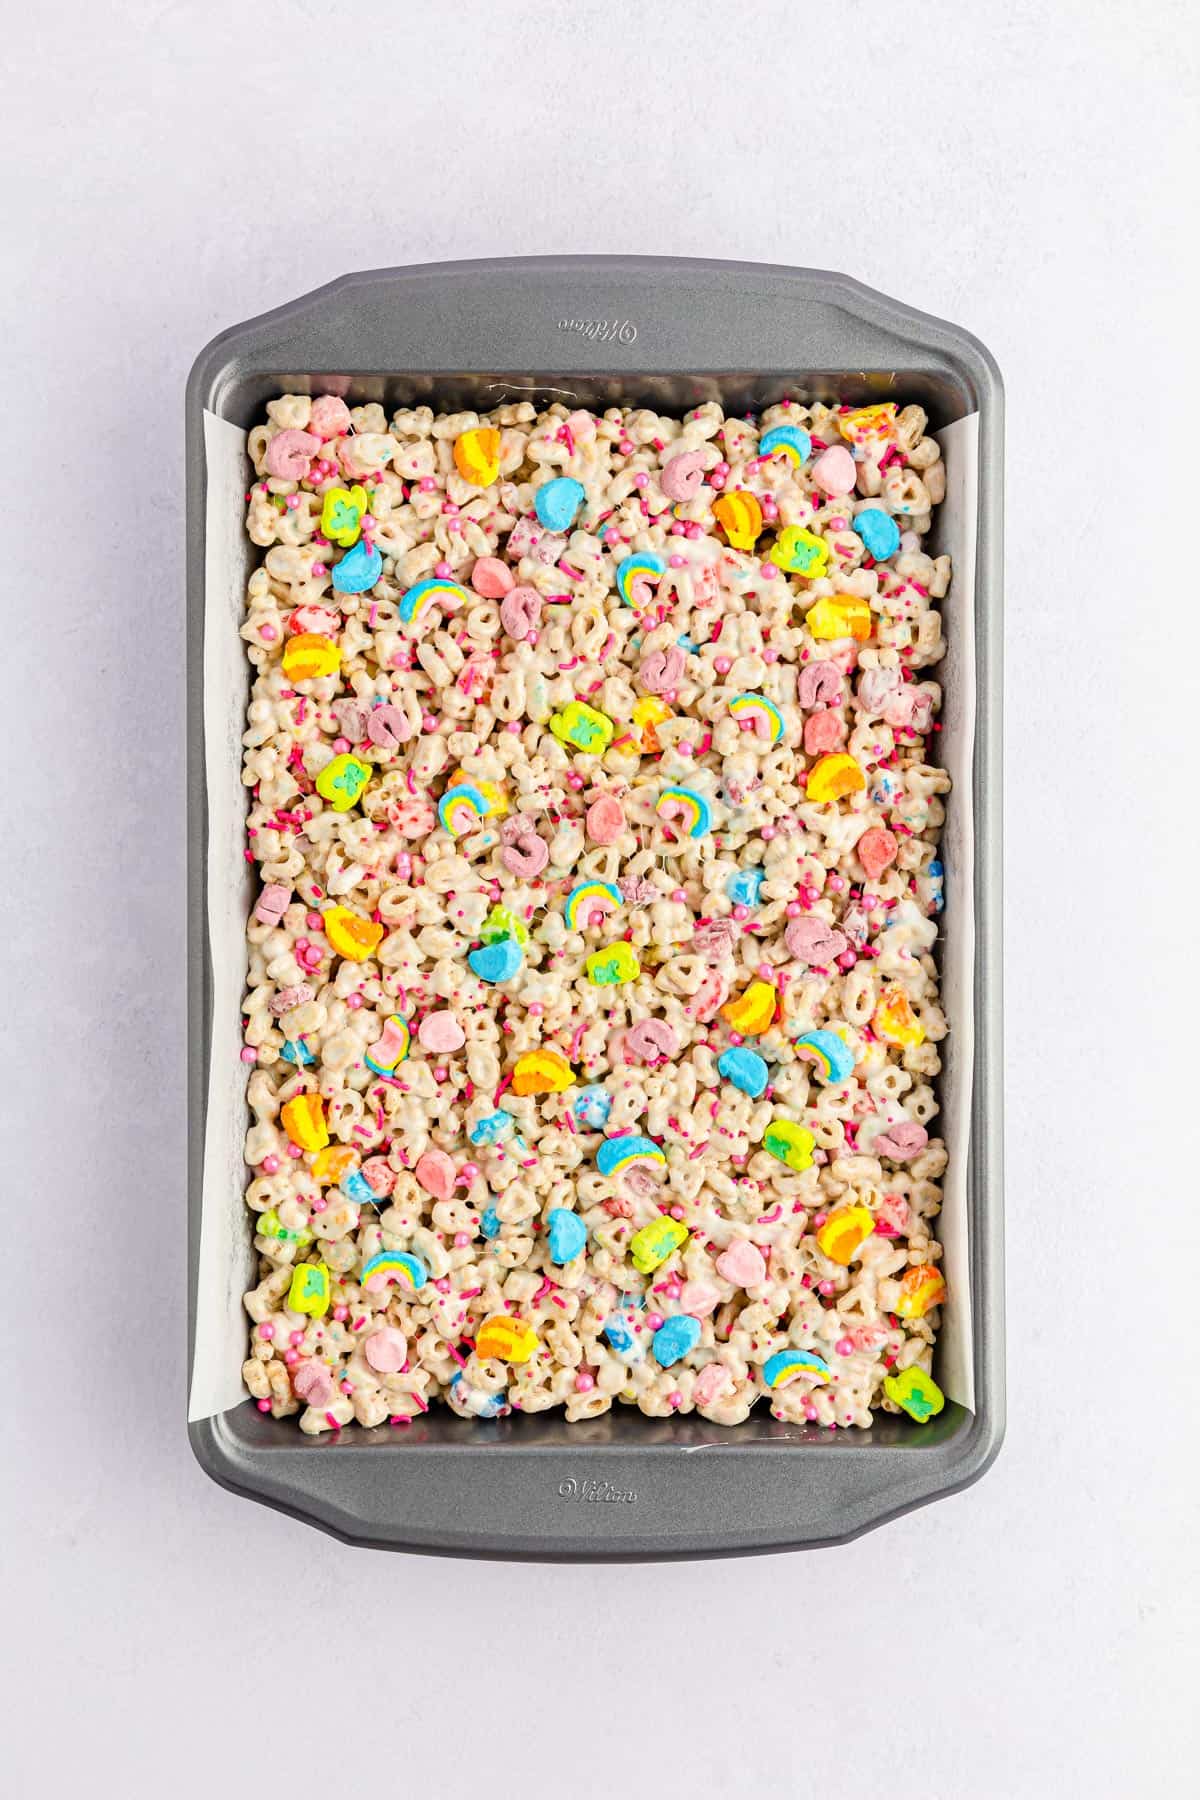 Pink sprinkles on lucky charms treats in a baking pan.